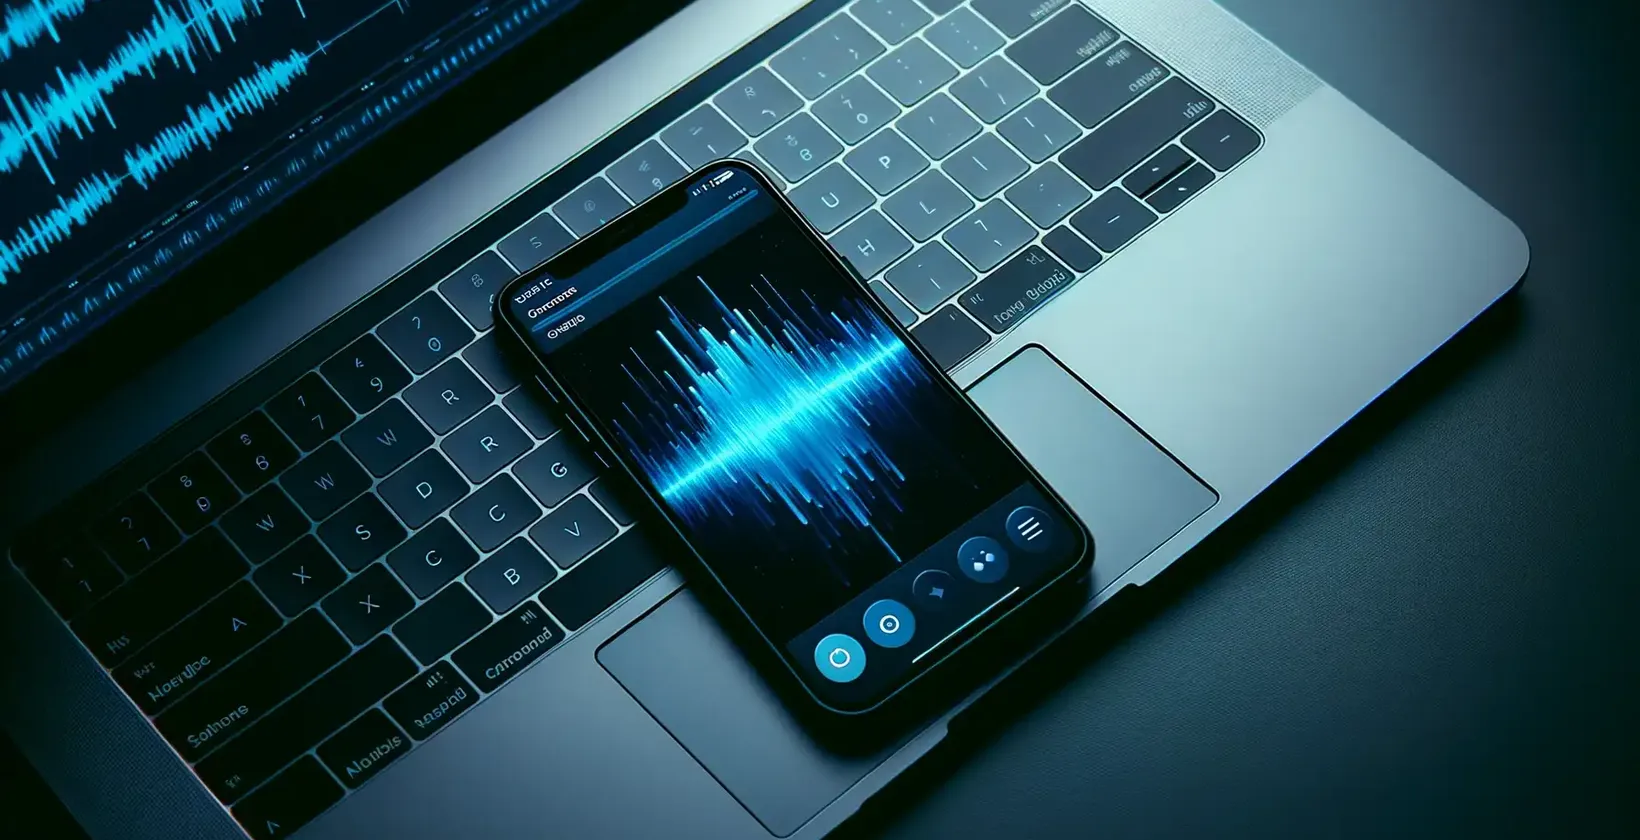 A close-up view of an iPhone displaying vibrant audio waveforms, next to an illuminated laptop keyboard